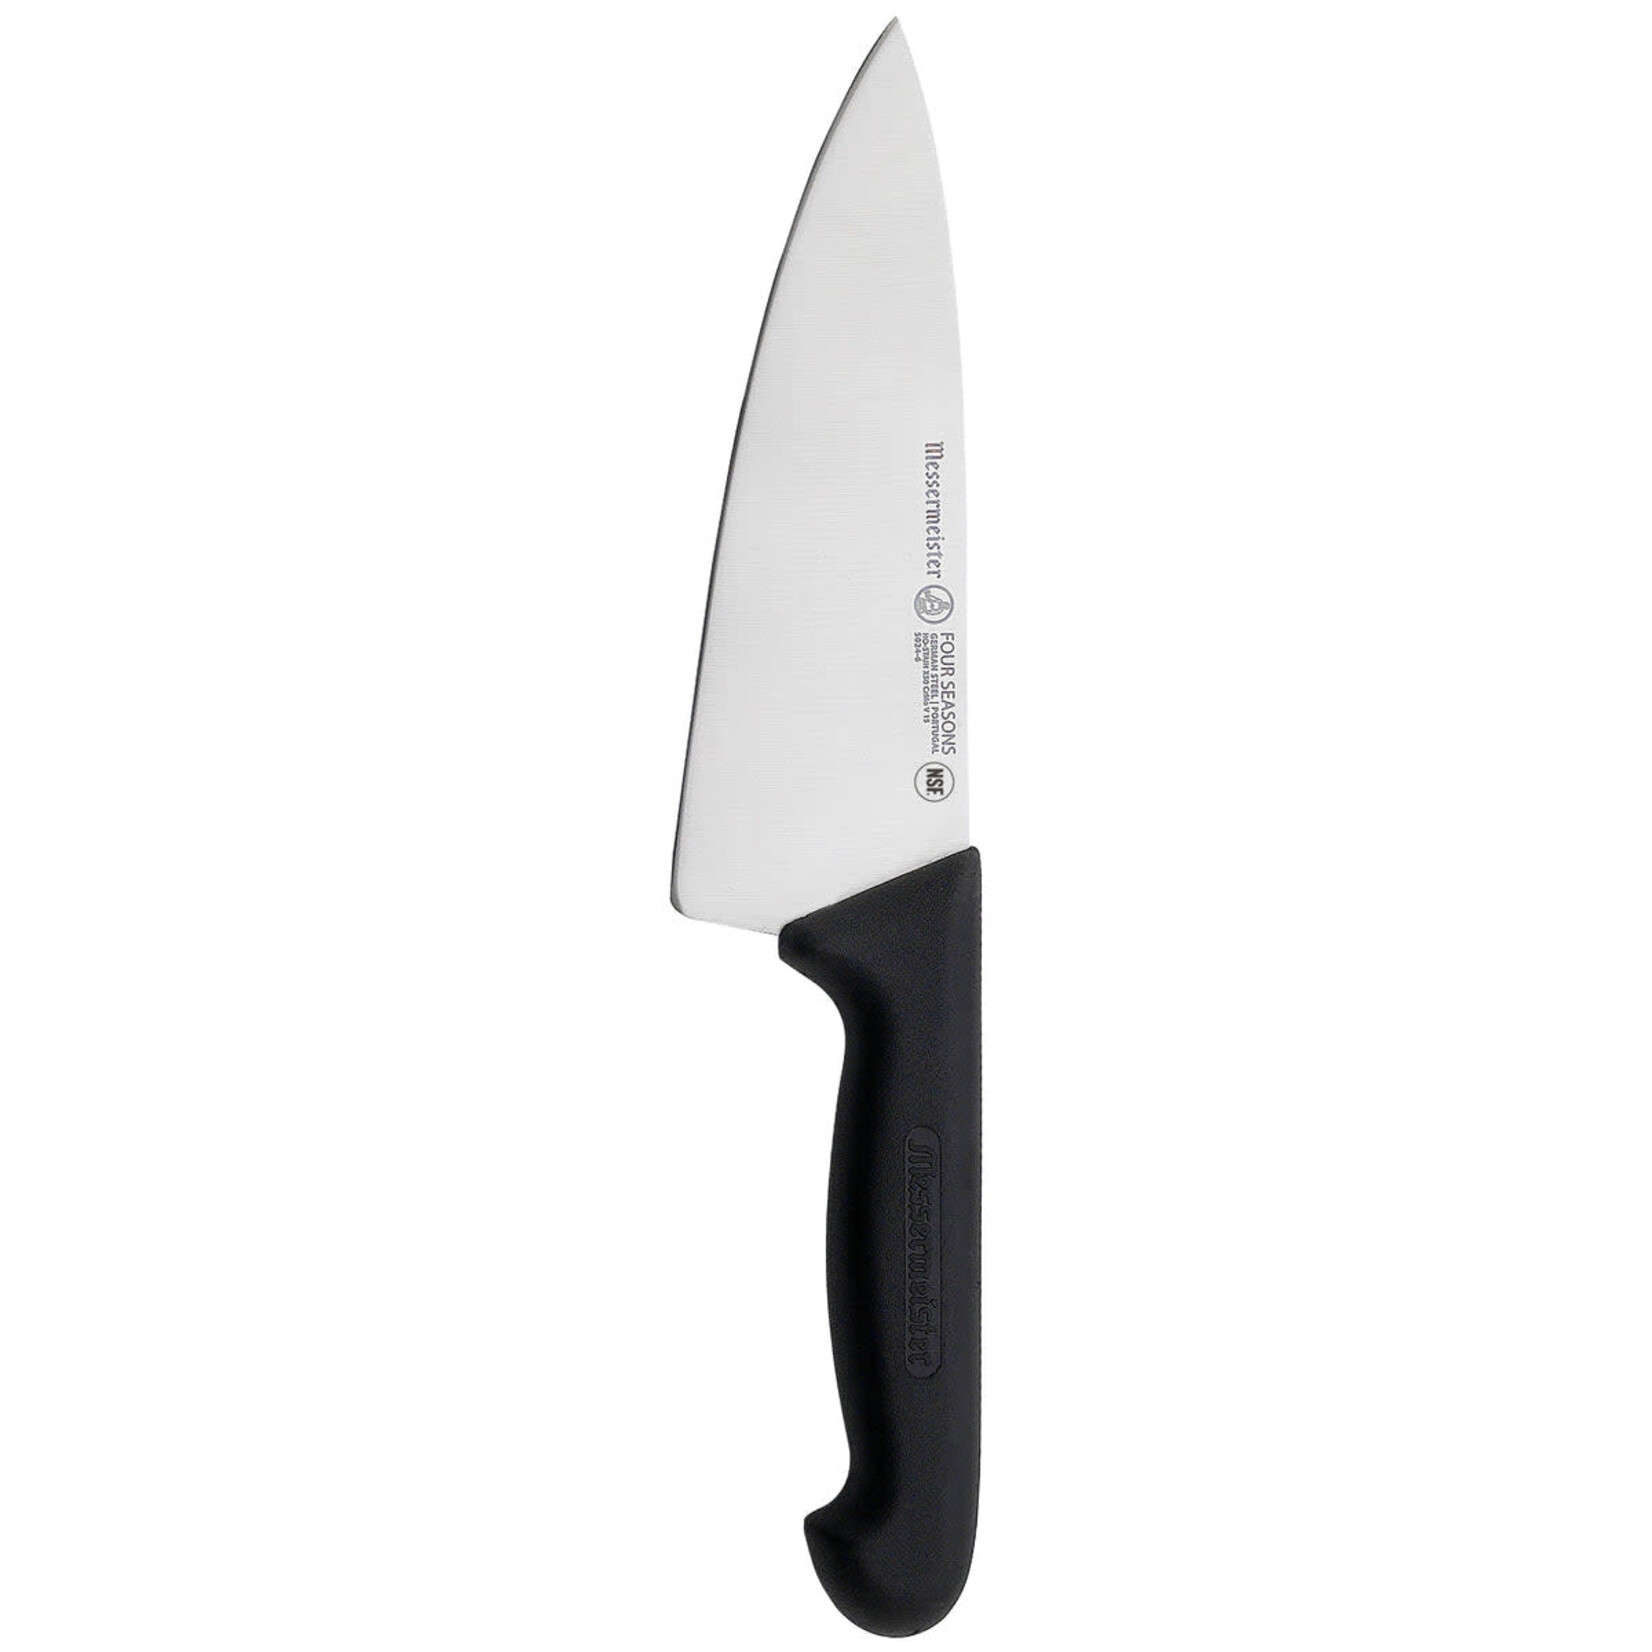 Messermeister Pro Series 6 Inch Wide-Blade Chef’s Knife with Polypropylene Handle